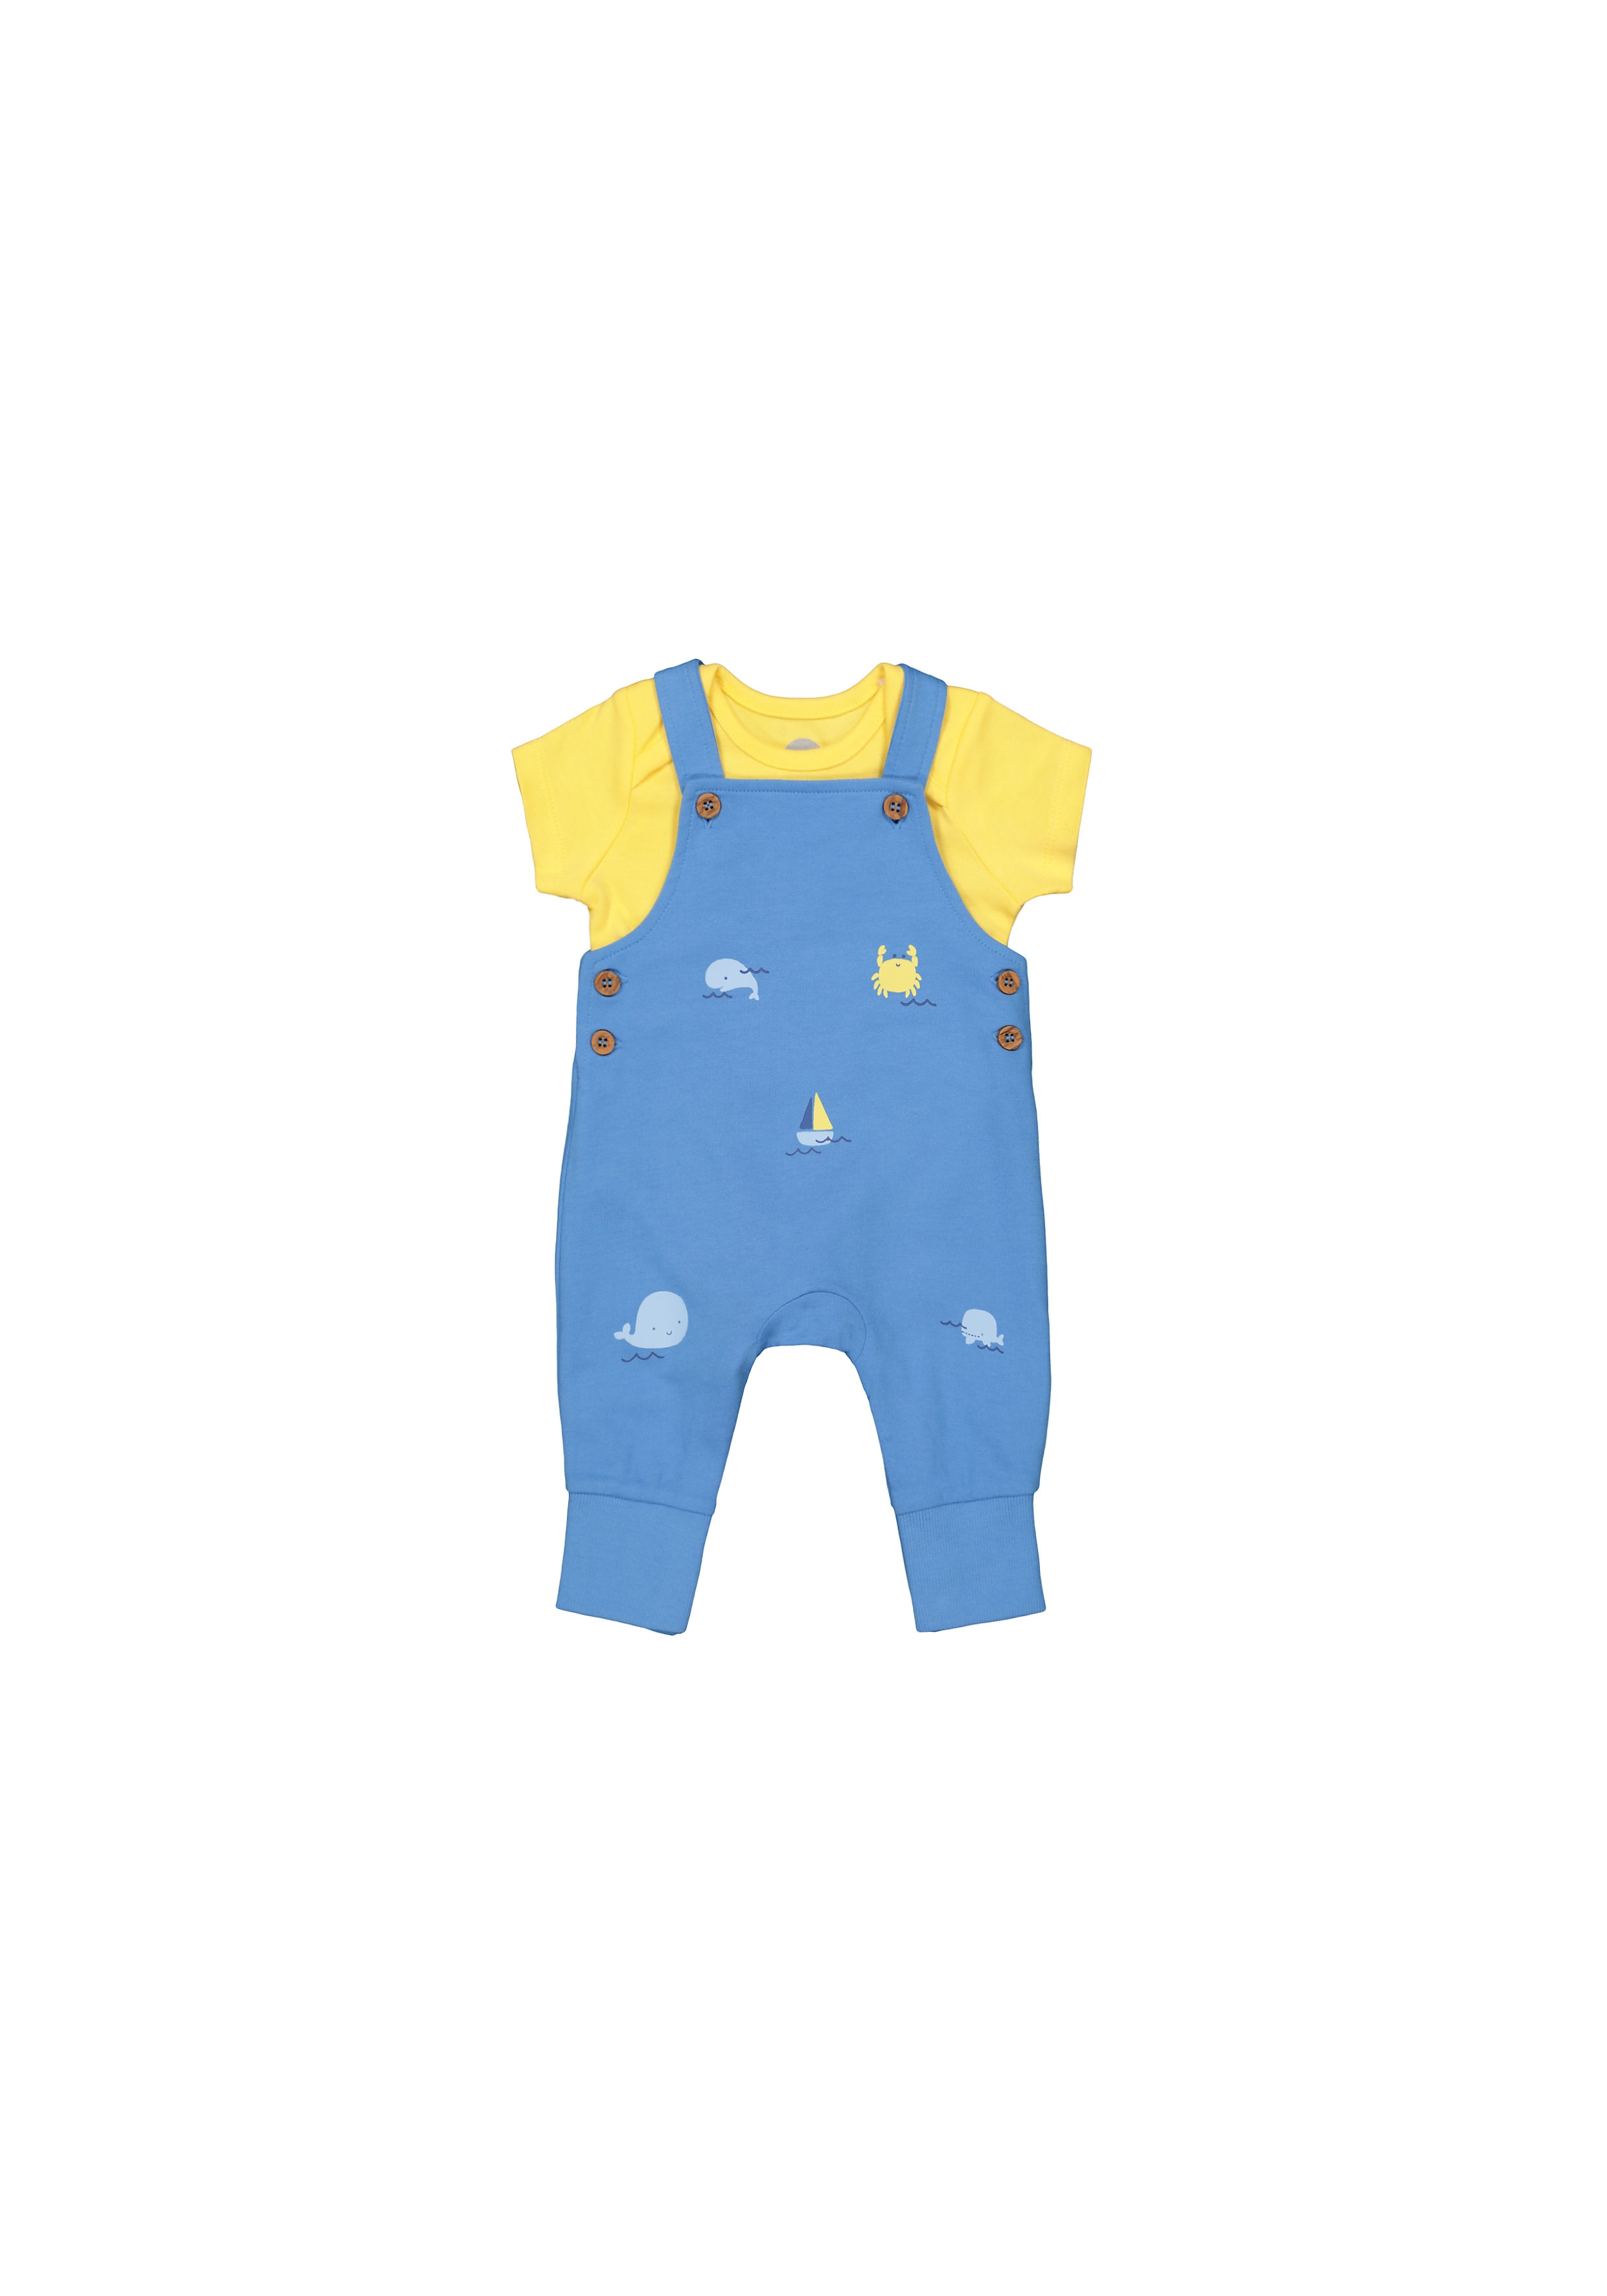 Mothercare | Boys Half Sleeves Dungaree Set Whale Print - Yellow Blue